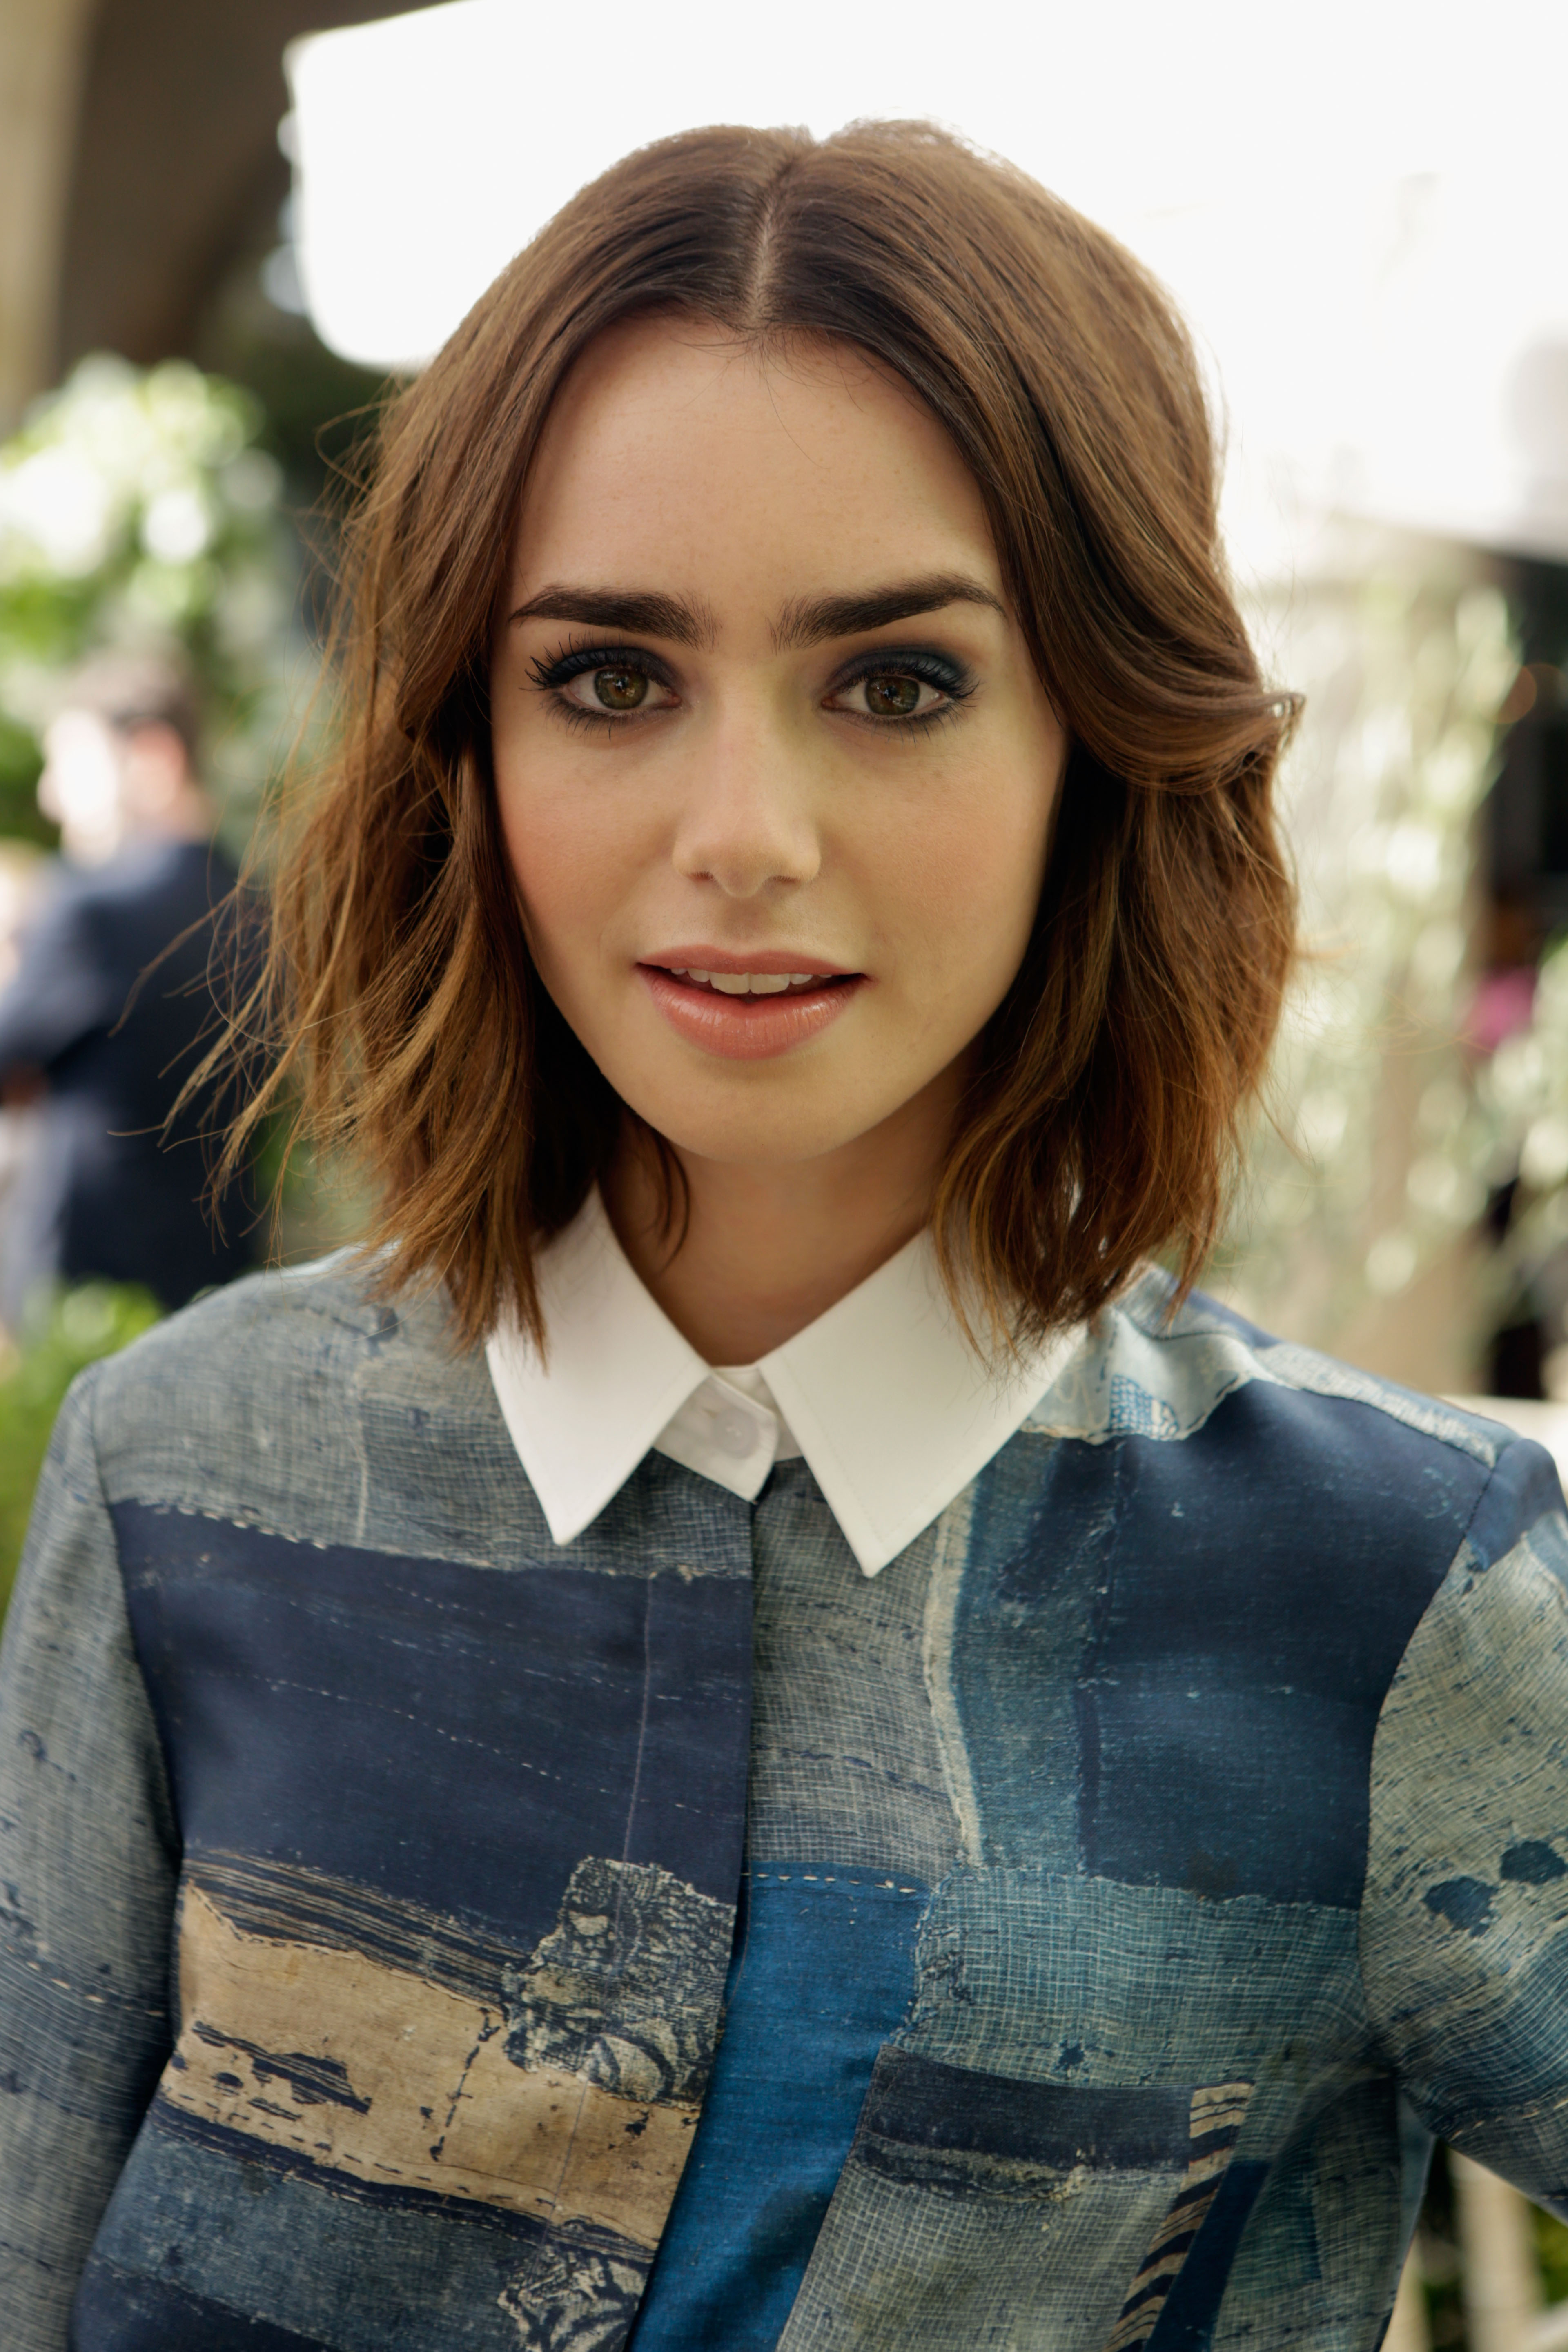 General photo of Lily Collins